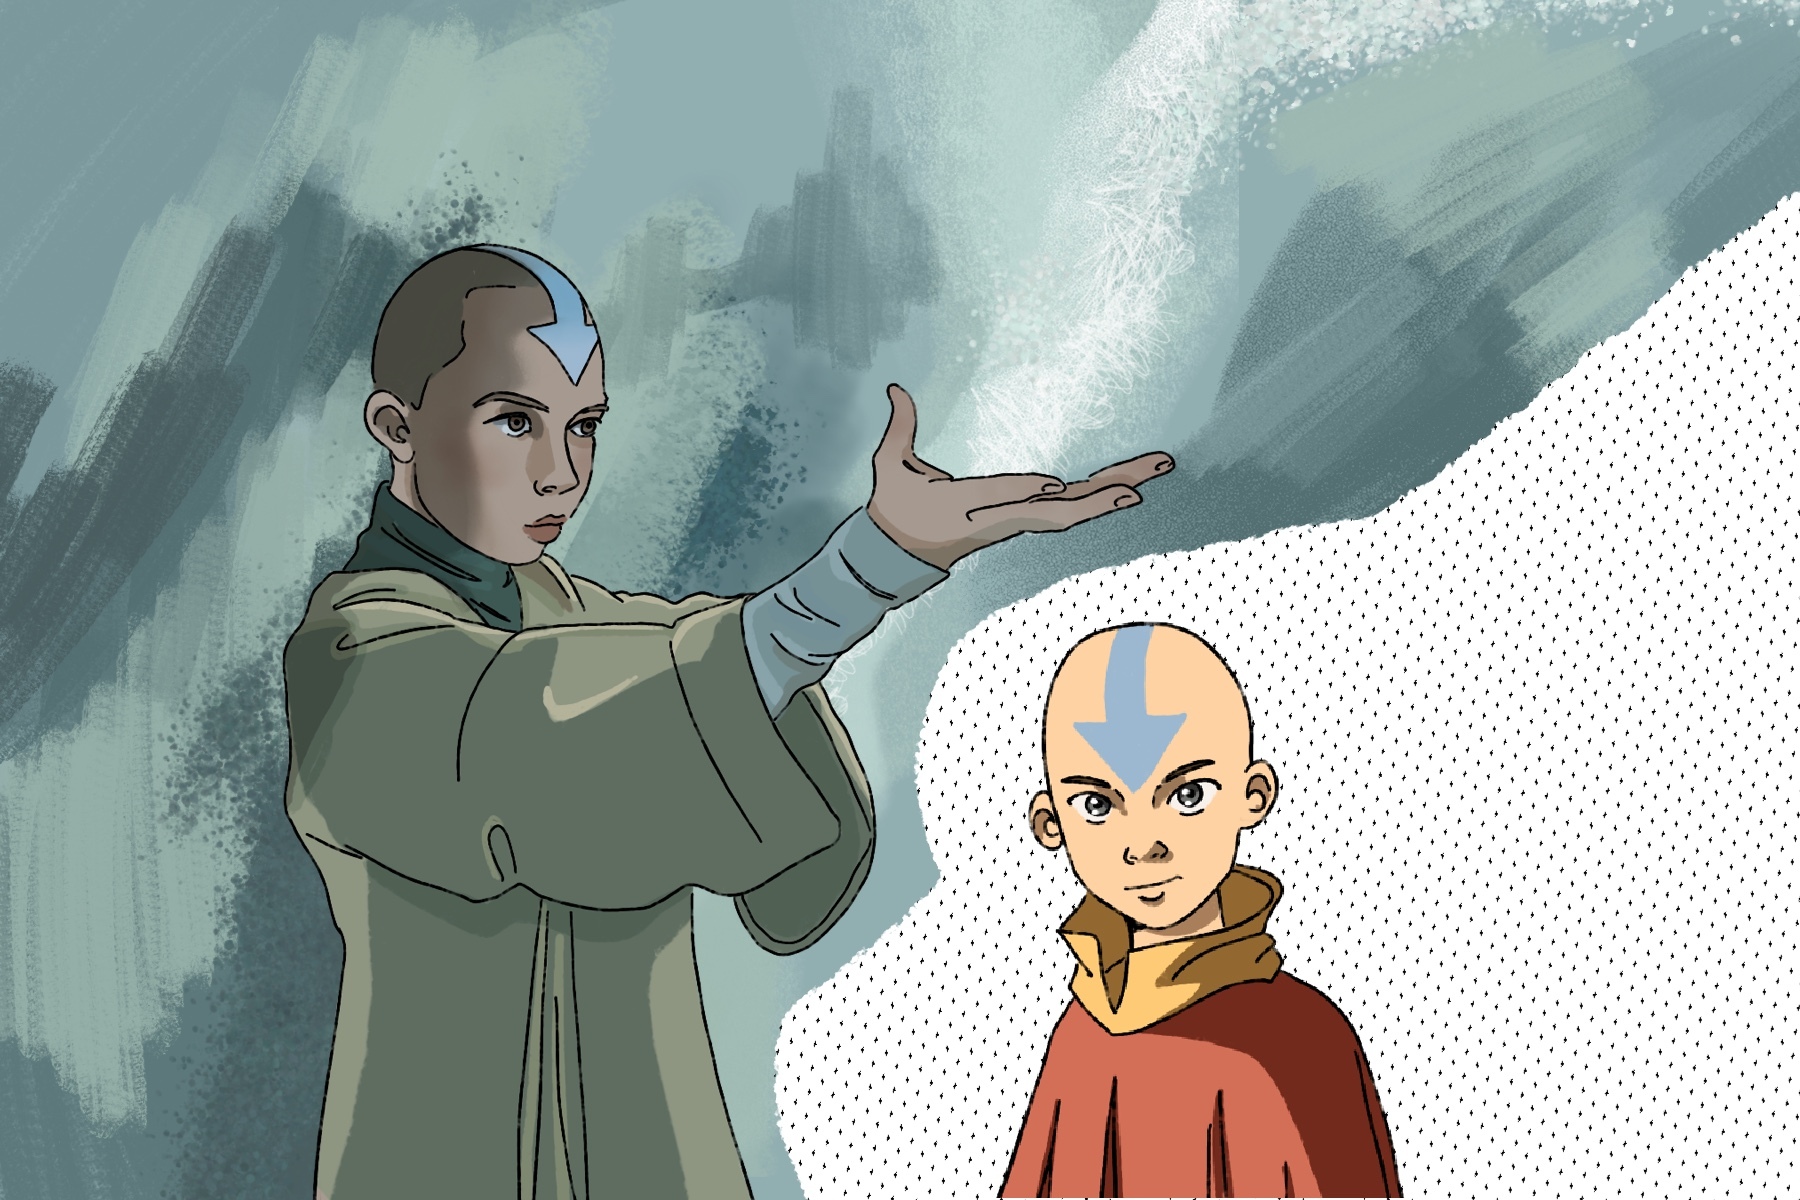 In an article about the new Avatar: the Last Airbender adaptation, an illustration of the main character and his live action counterpart